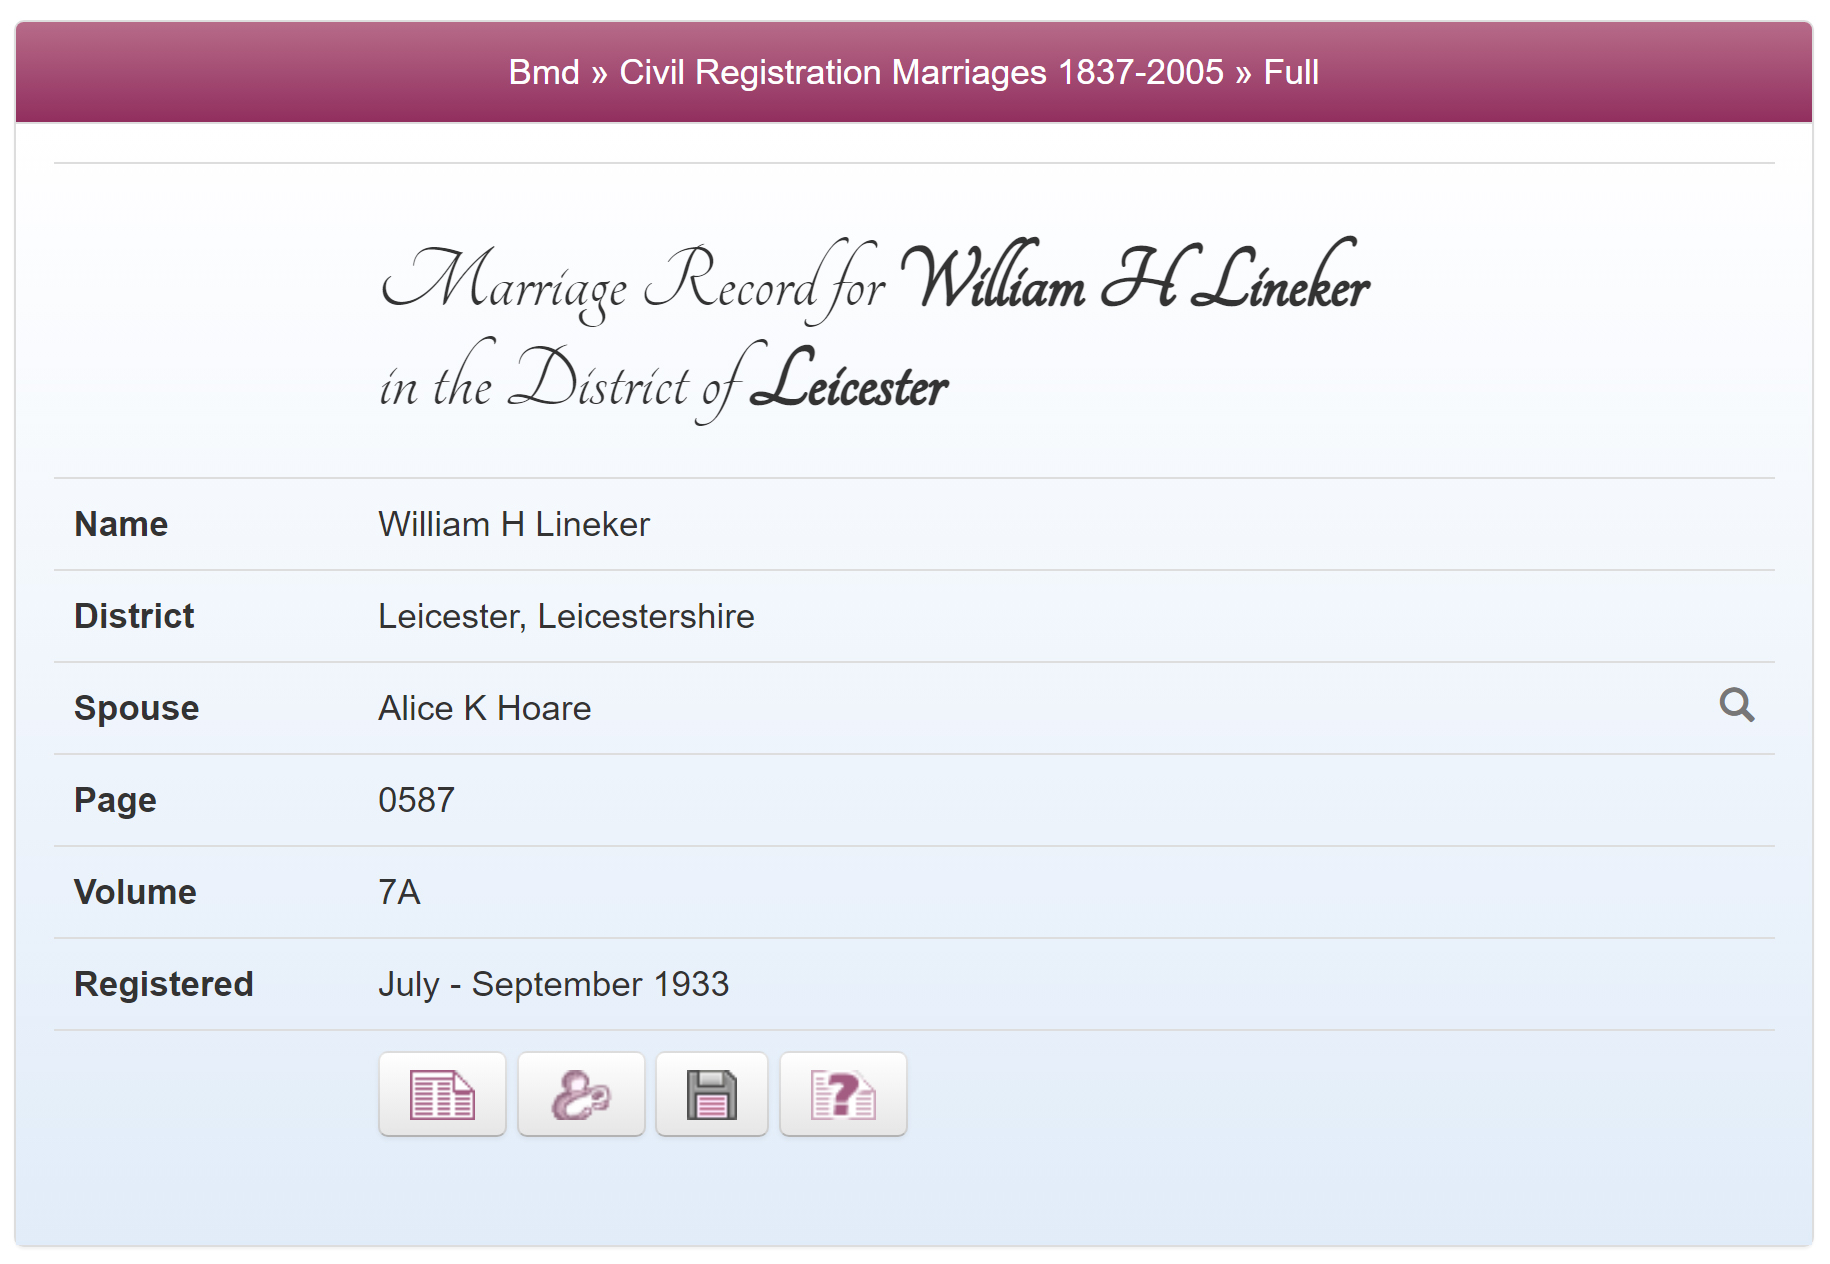 William Lineker and Alice Hoare's Marriage Record